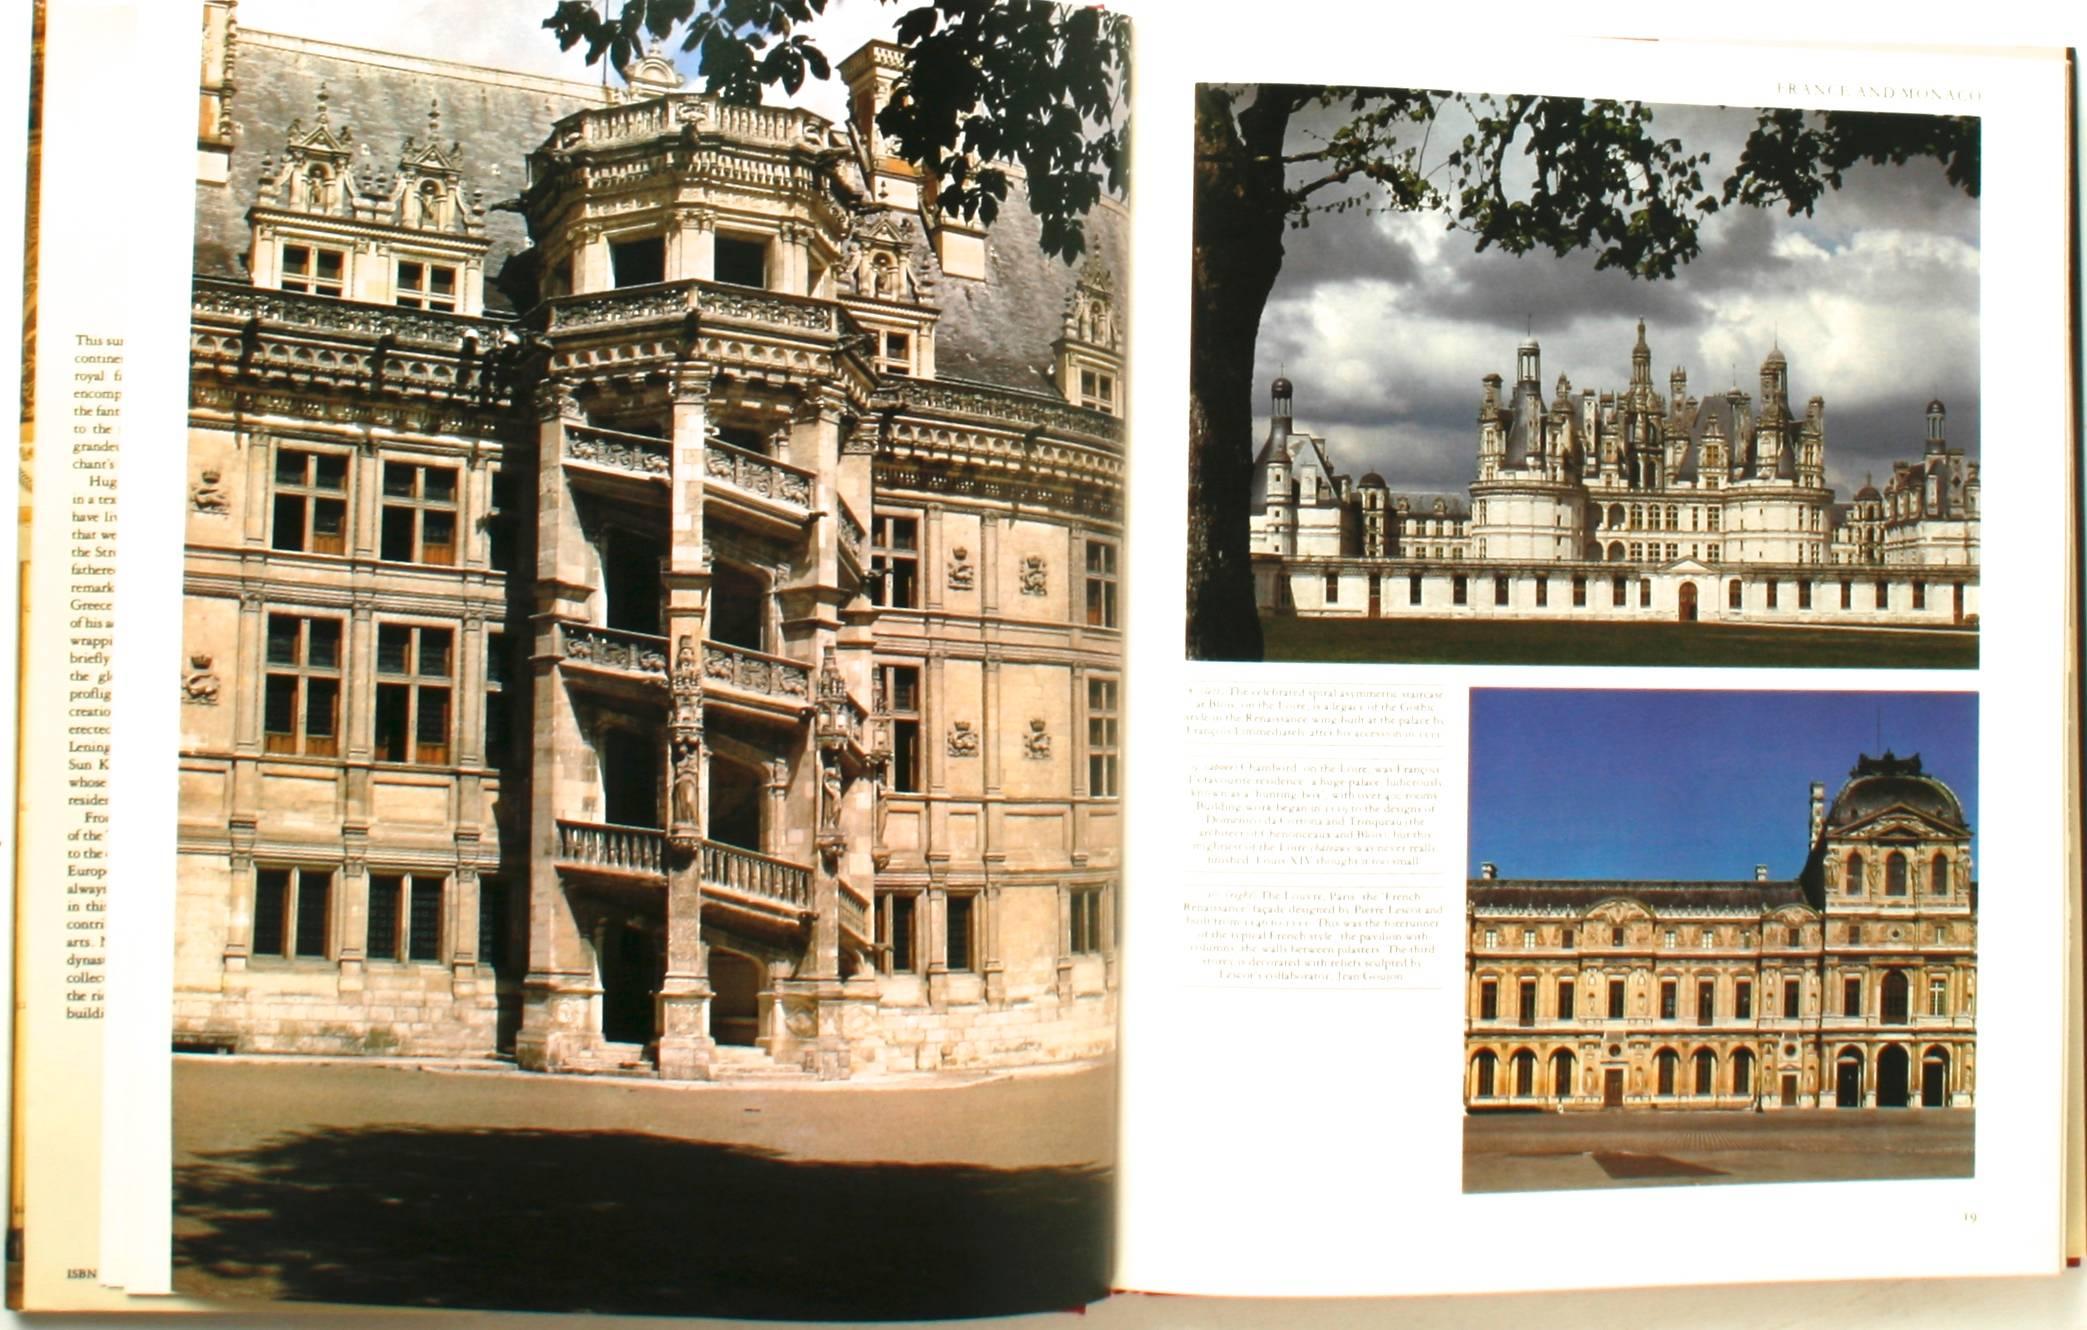 Royal Palaces of Europe by Hugh Montgomery-Massingberd. New York: Vendome Press, 1983. First edition hardcover with dust jacket. 208 pp. A beautiful tour of the principle residences of Europe's royal families past and present. It illustrates in the